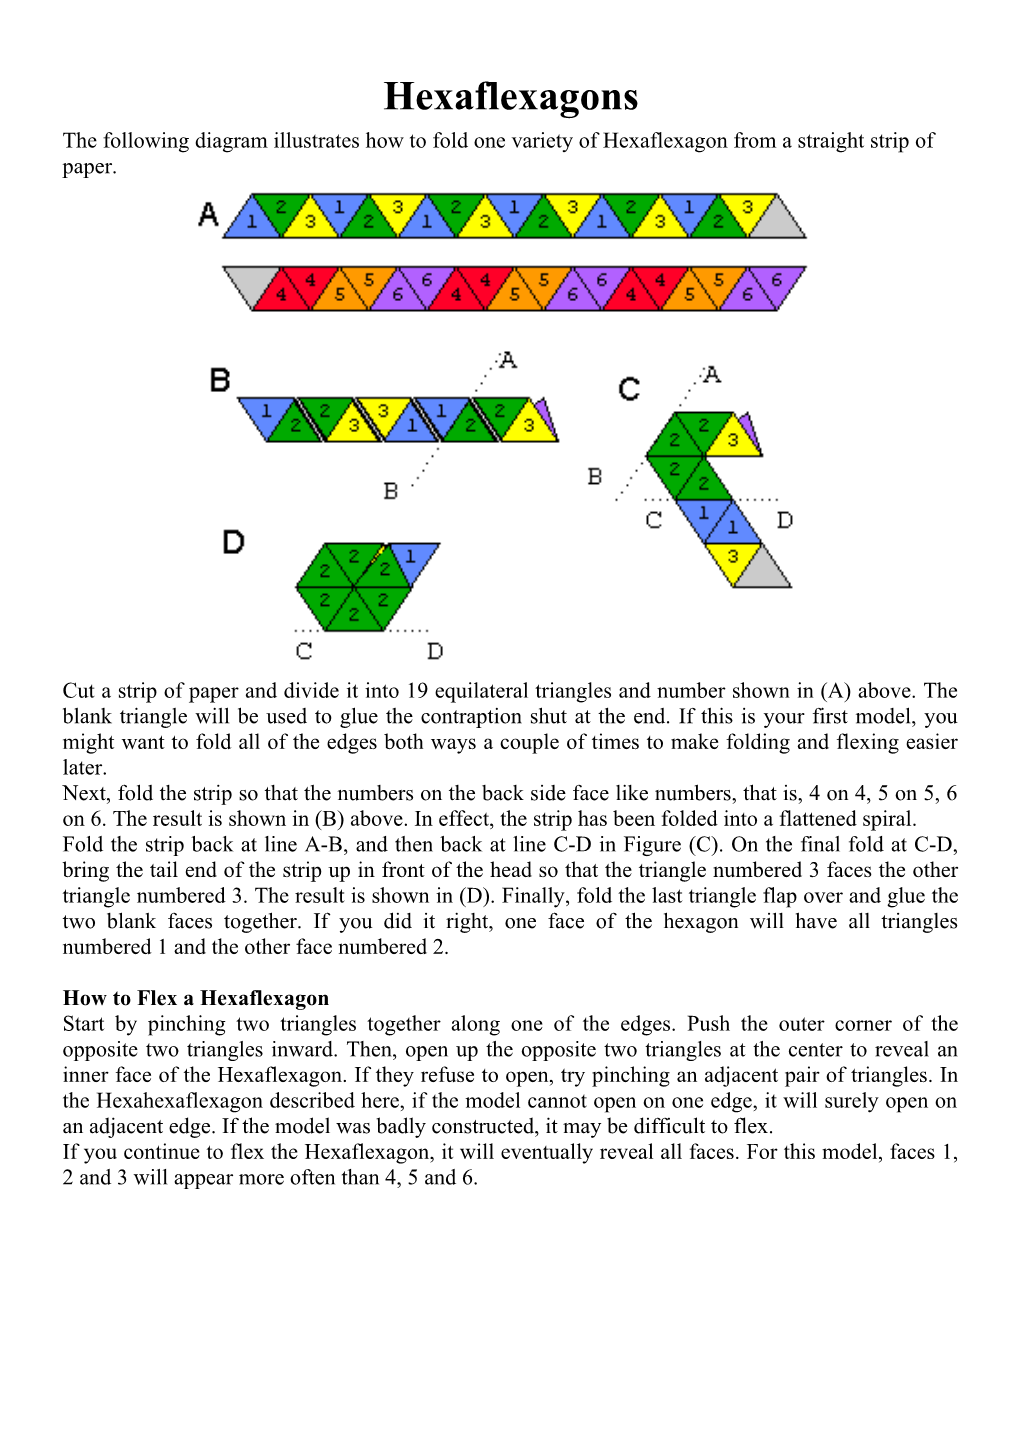 The Following Diagram Illustrates How to Fold One Variety of Hexaflexagon from a Straight